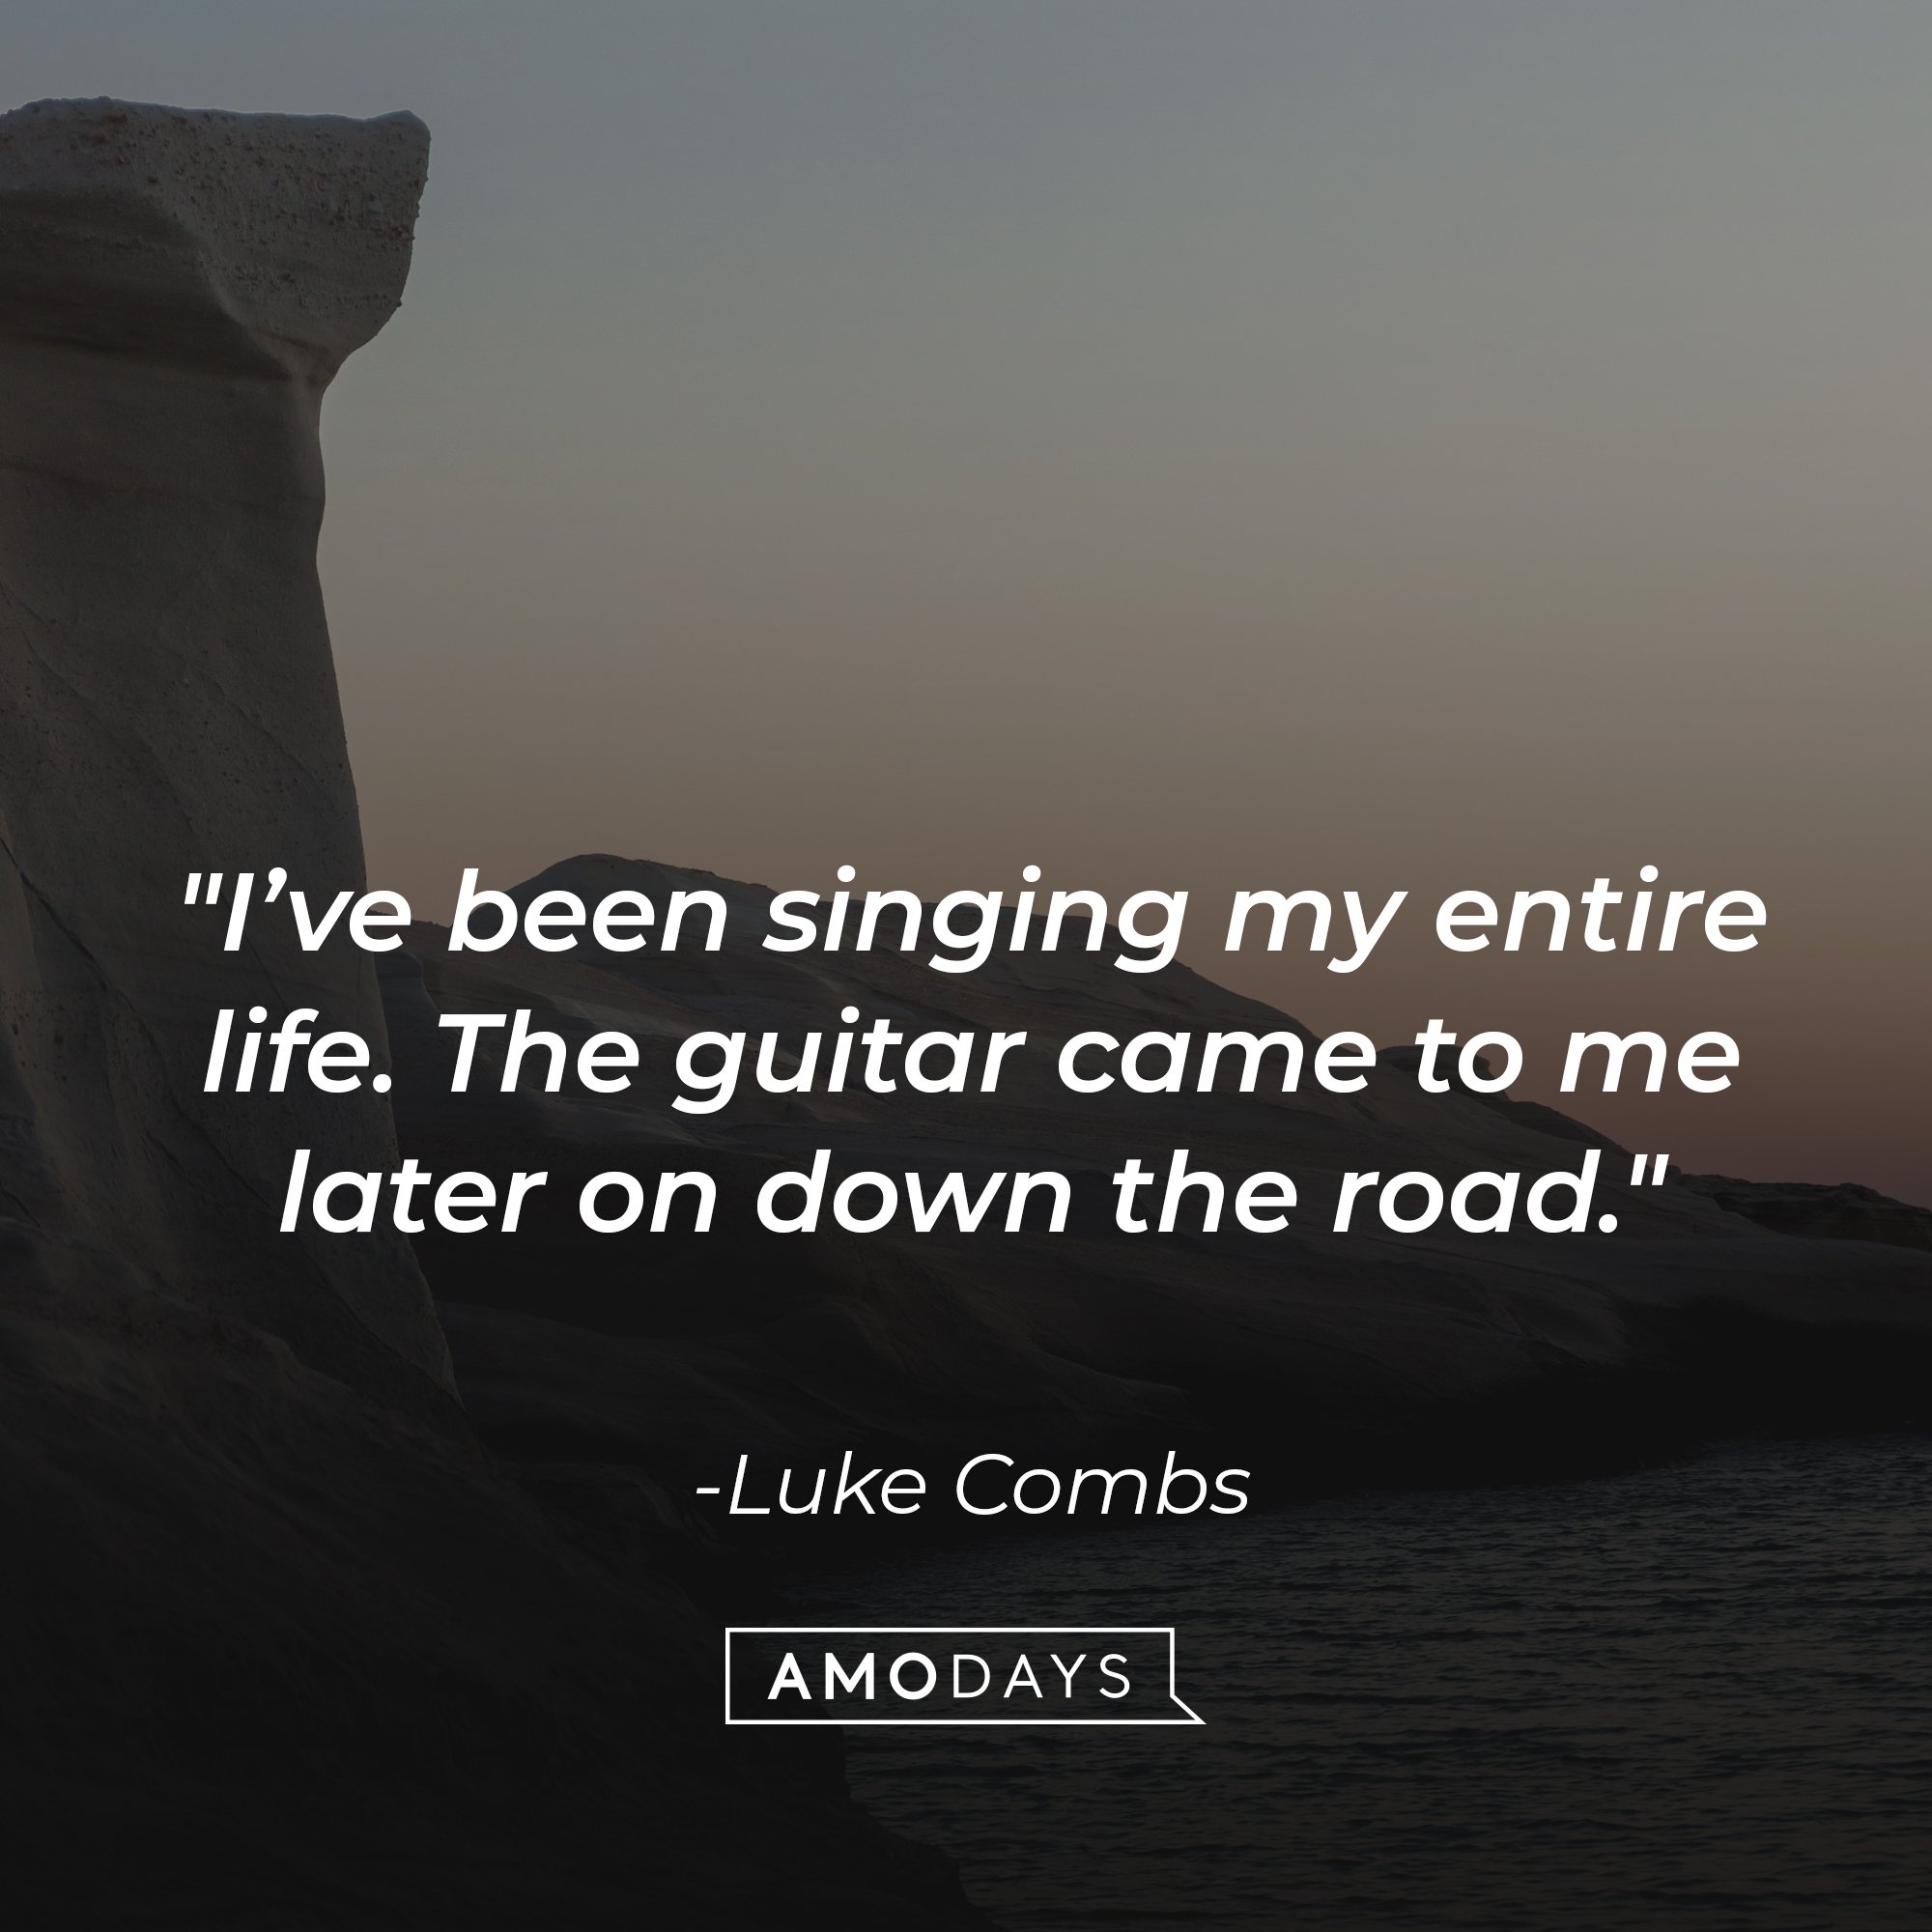 's quote "I’ve been singing my entire life. The guitar came to me later on down the road." | Source: Unsplash.com